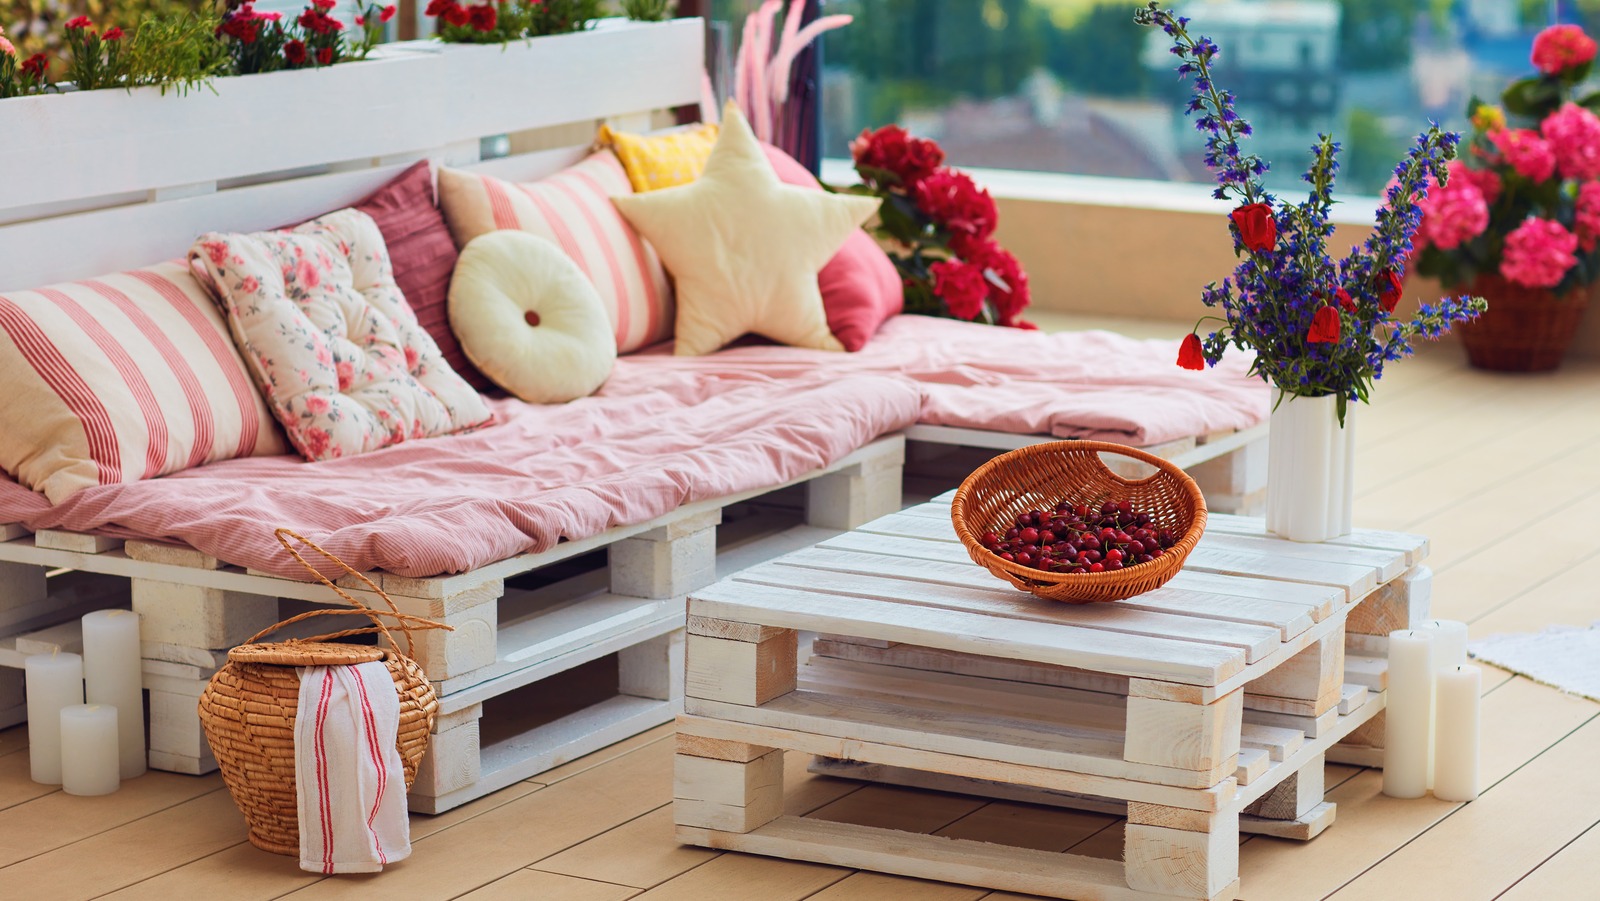 How To Make Your Own Pallet Couch – House Digest